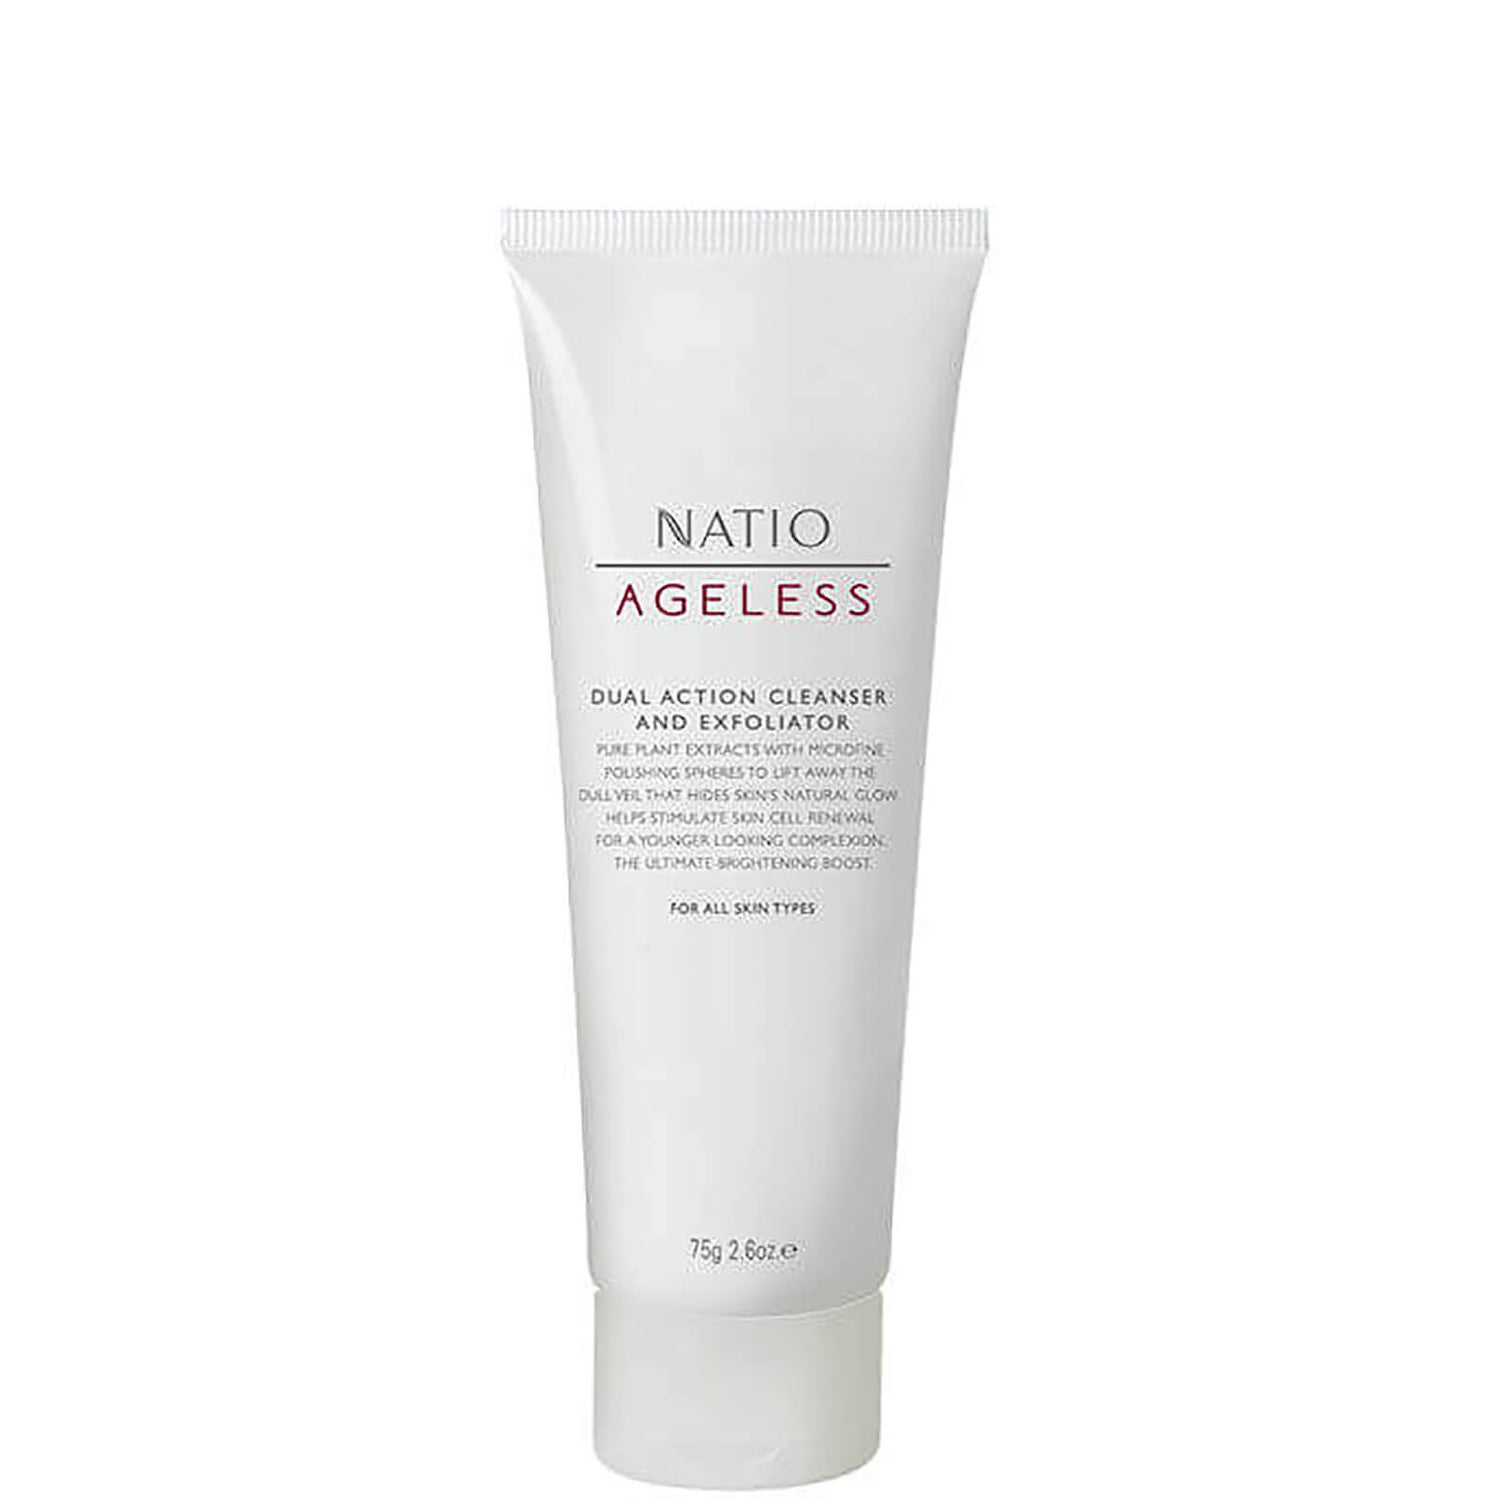 Natio Dual Action Cleanser and Exfoliator (2.5oz)